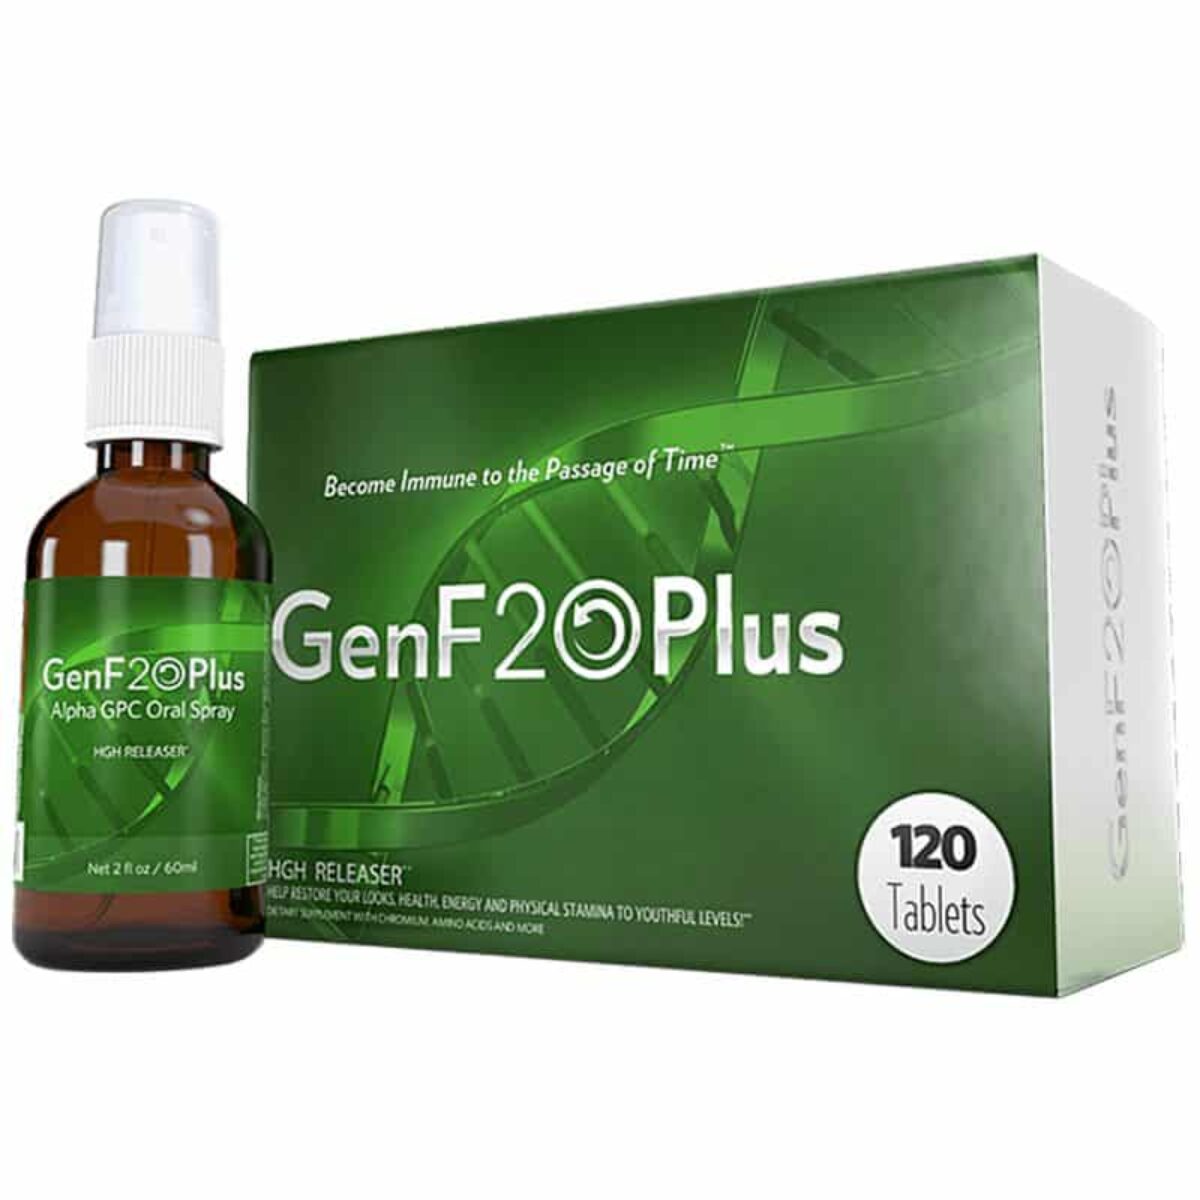 GenF20Plus- Diminished wrinkles, crows feet, laugh lines, and age spots.